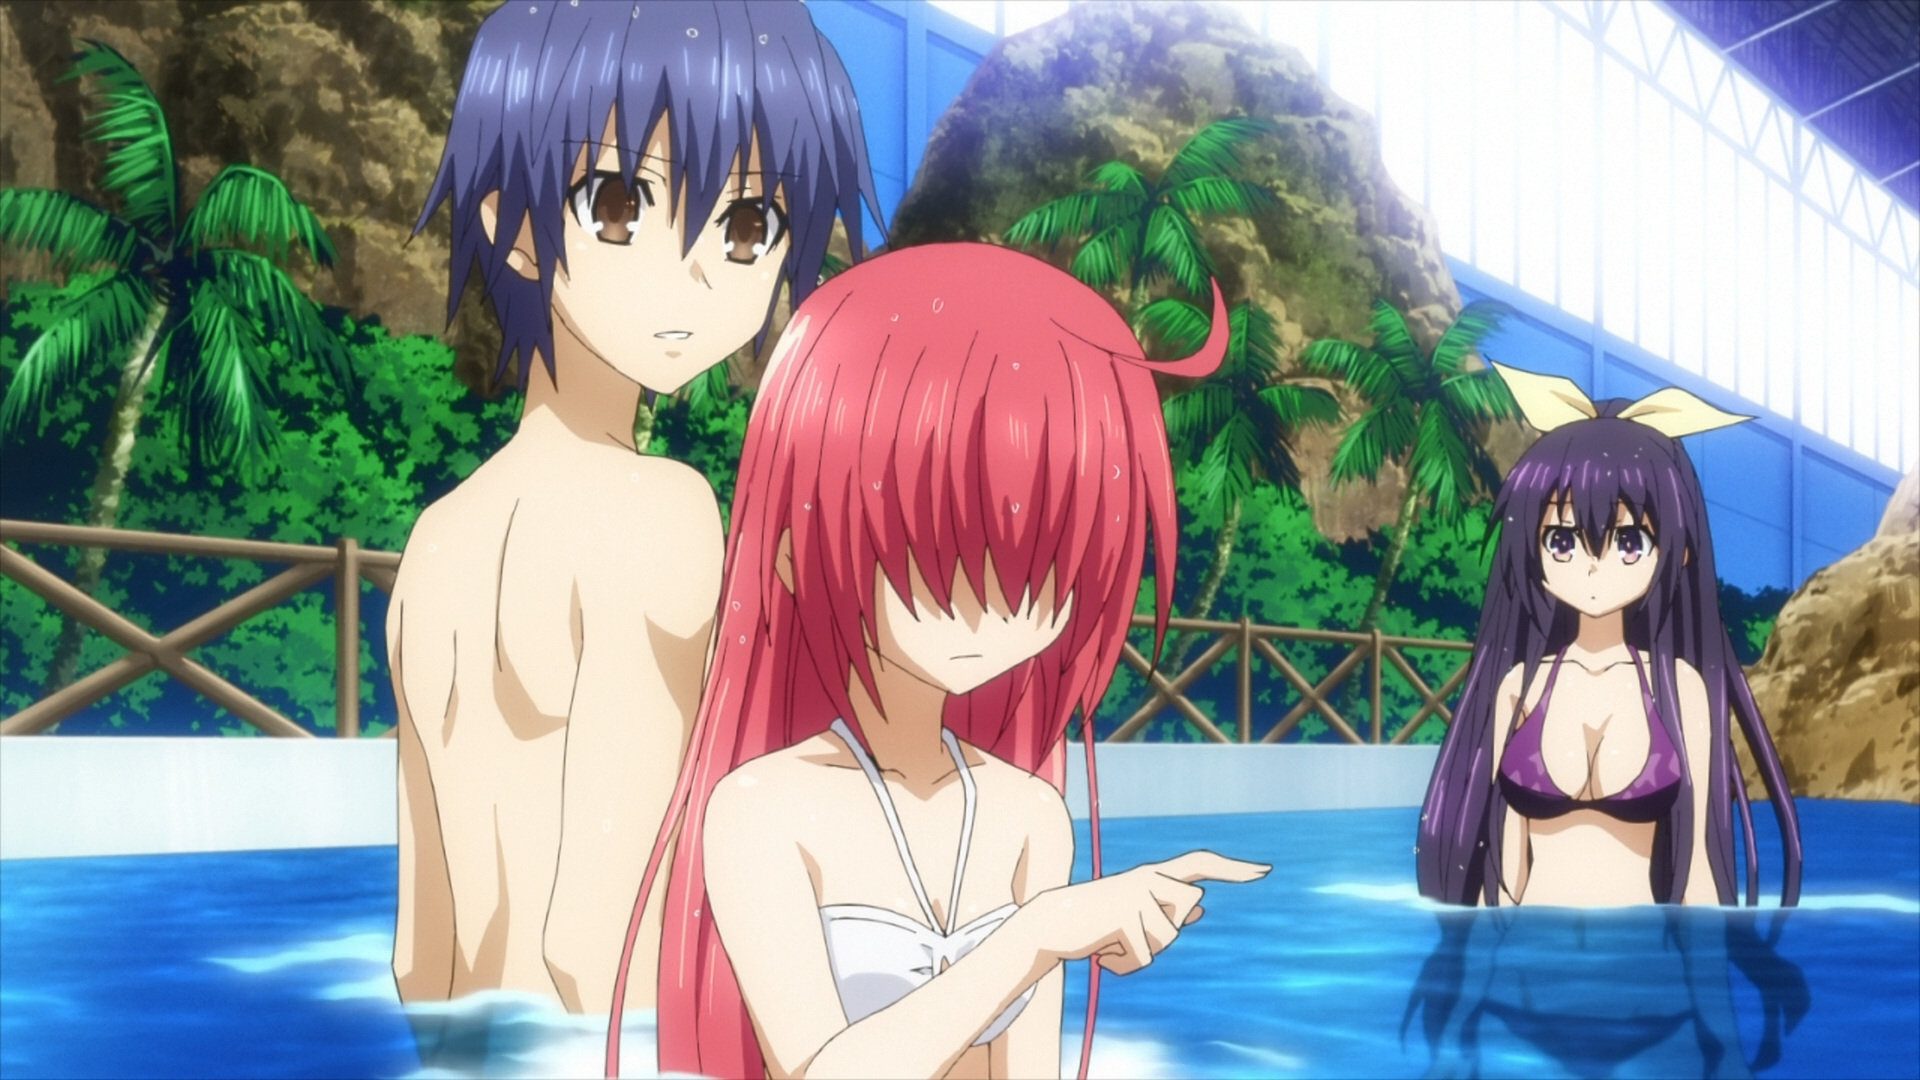 The date with Kotori started off rough, but Shido’s bold move saved it. 